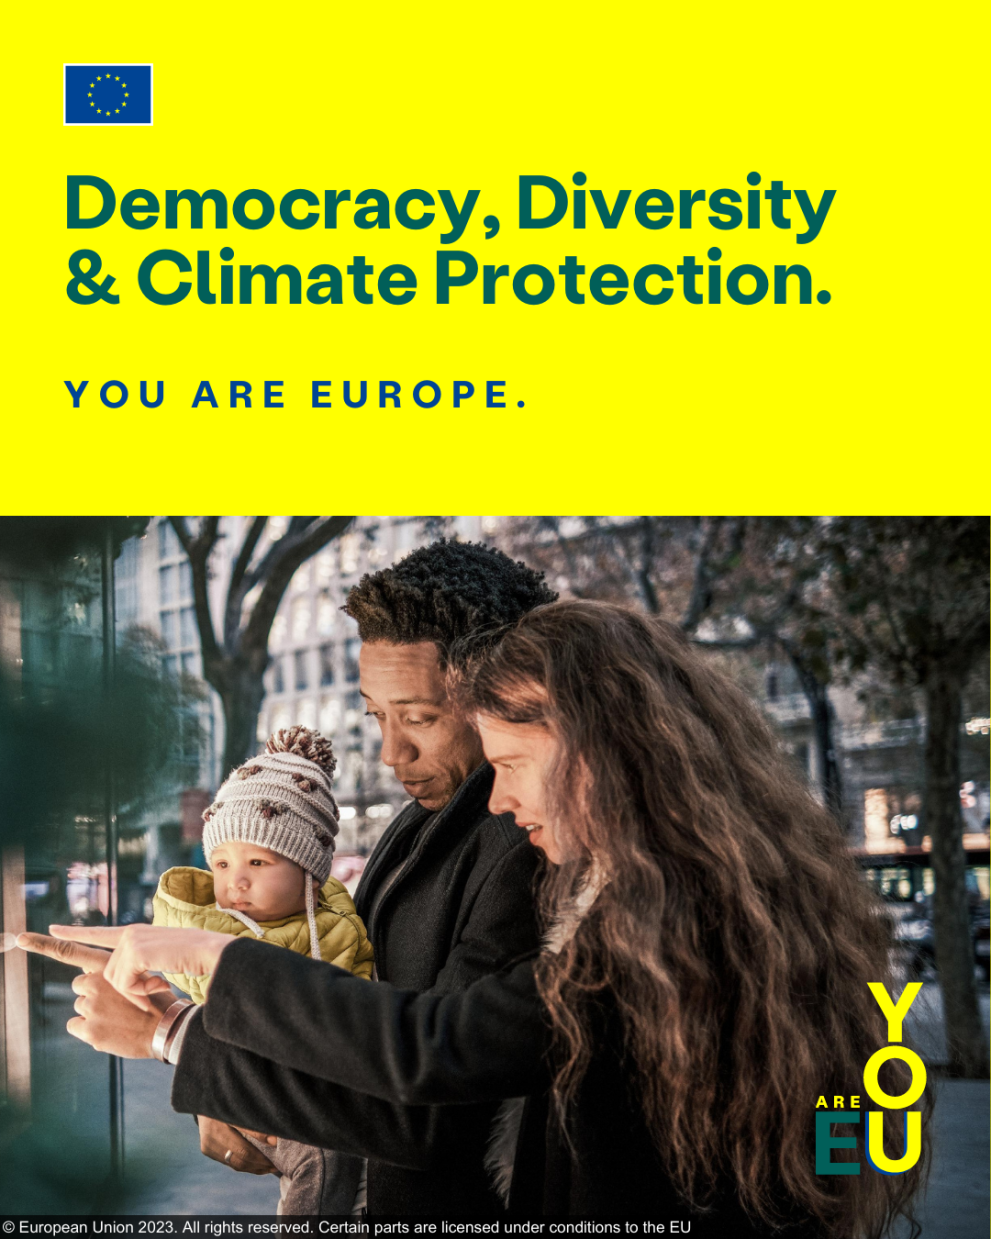 Democracy, diversity and climate protection